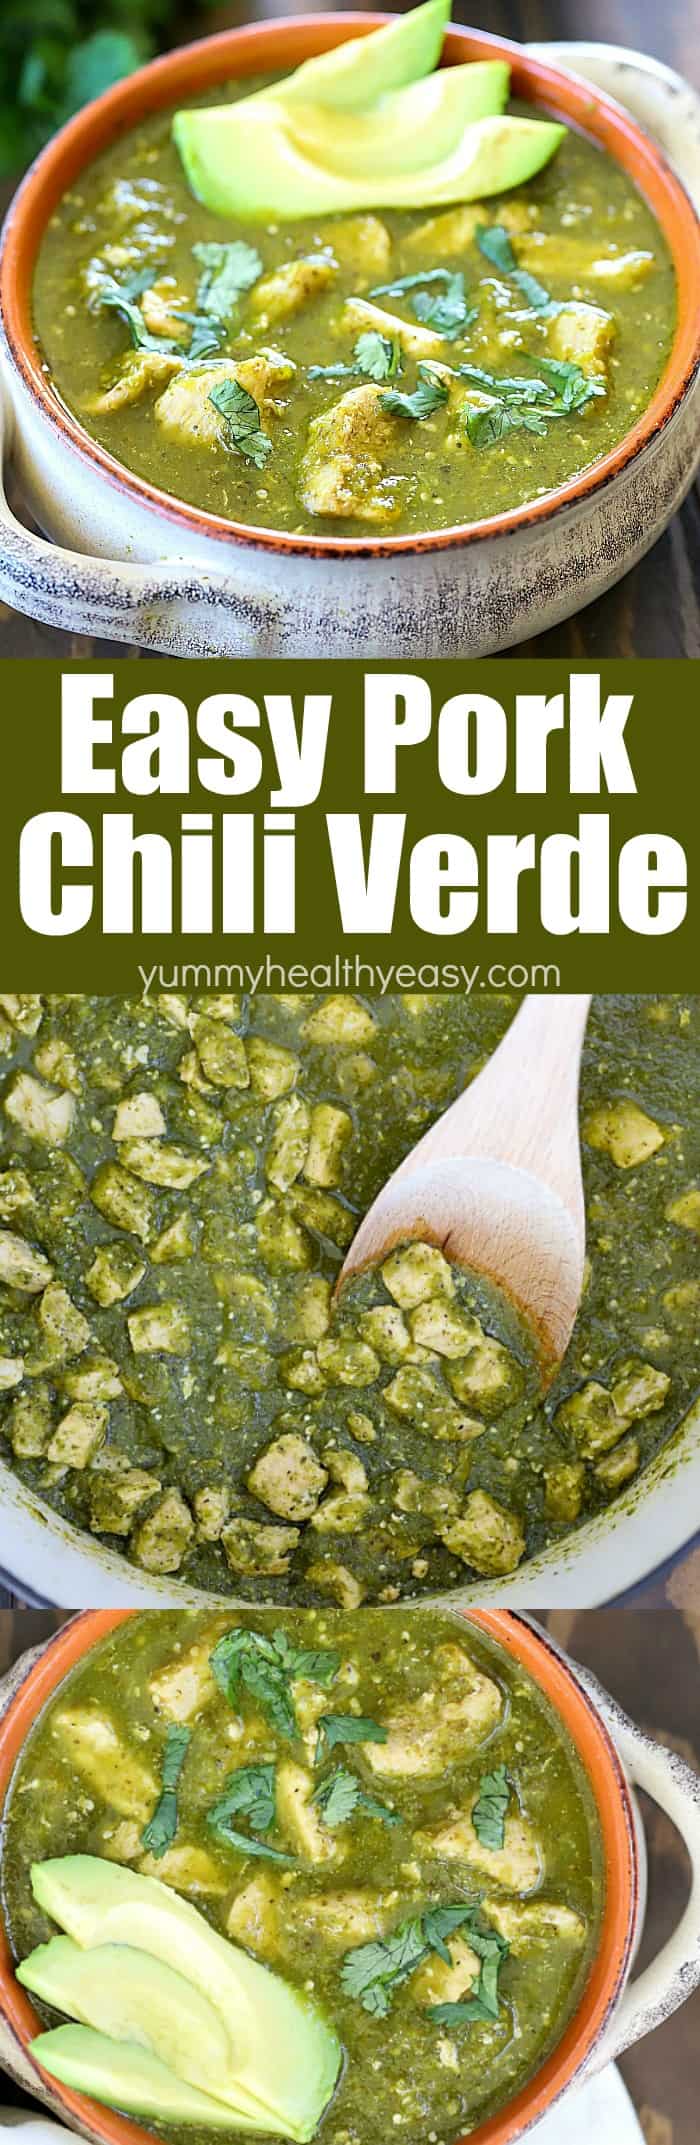 You will LOVE the bold flavors in this Pork Chili Verde! Cubed pieces of pork loin are simmered until super tender and then added to a delicious homemade verde sauce - SO good! Comfort food at its best! Plus my recap from the Pass the Pork Tour in Michigan! #ad #pork #recipe #dinner #chiliverde #verde #mexicanfood #easyrecipe #yummyhealthyeasy #yummy  via @jennikolaus